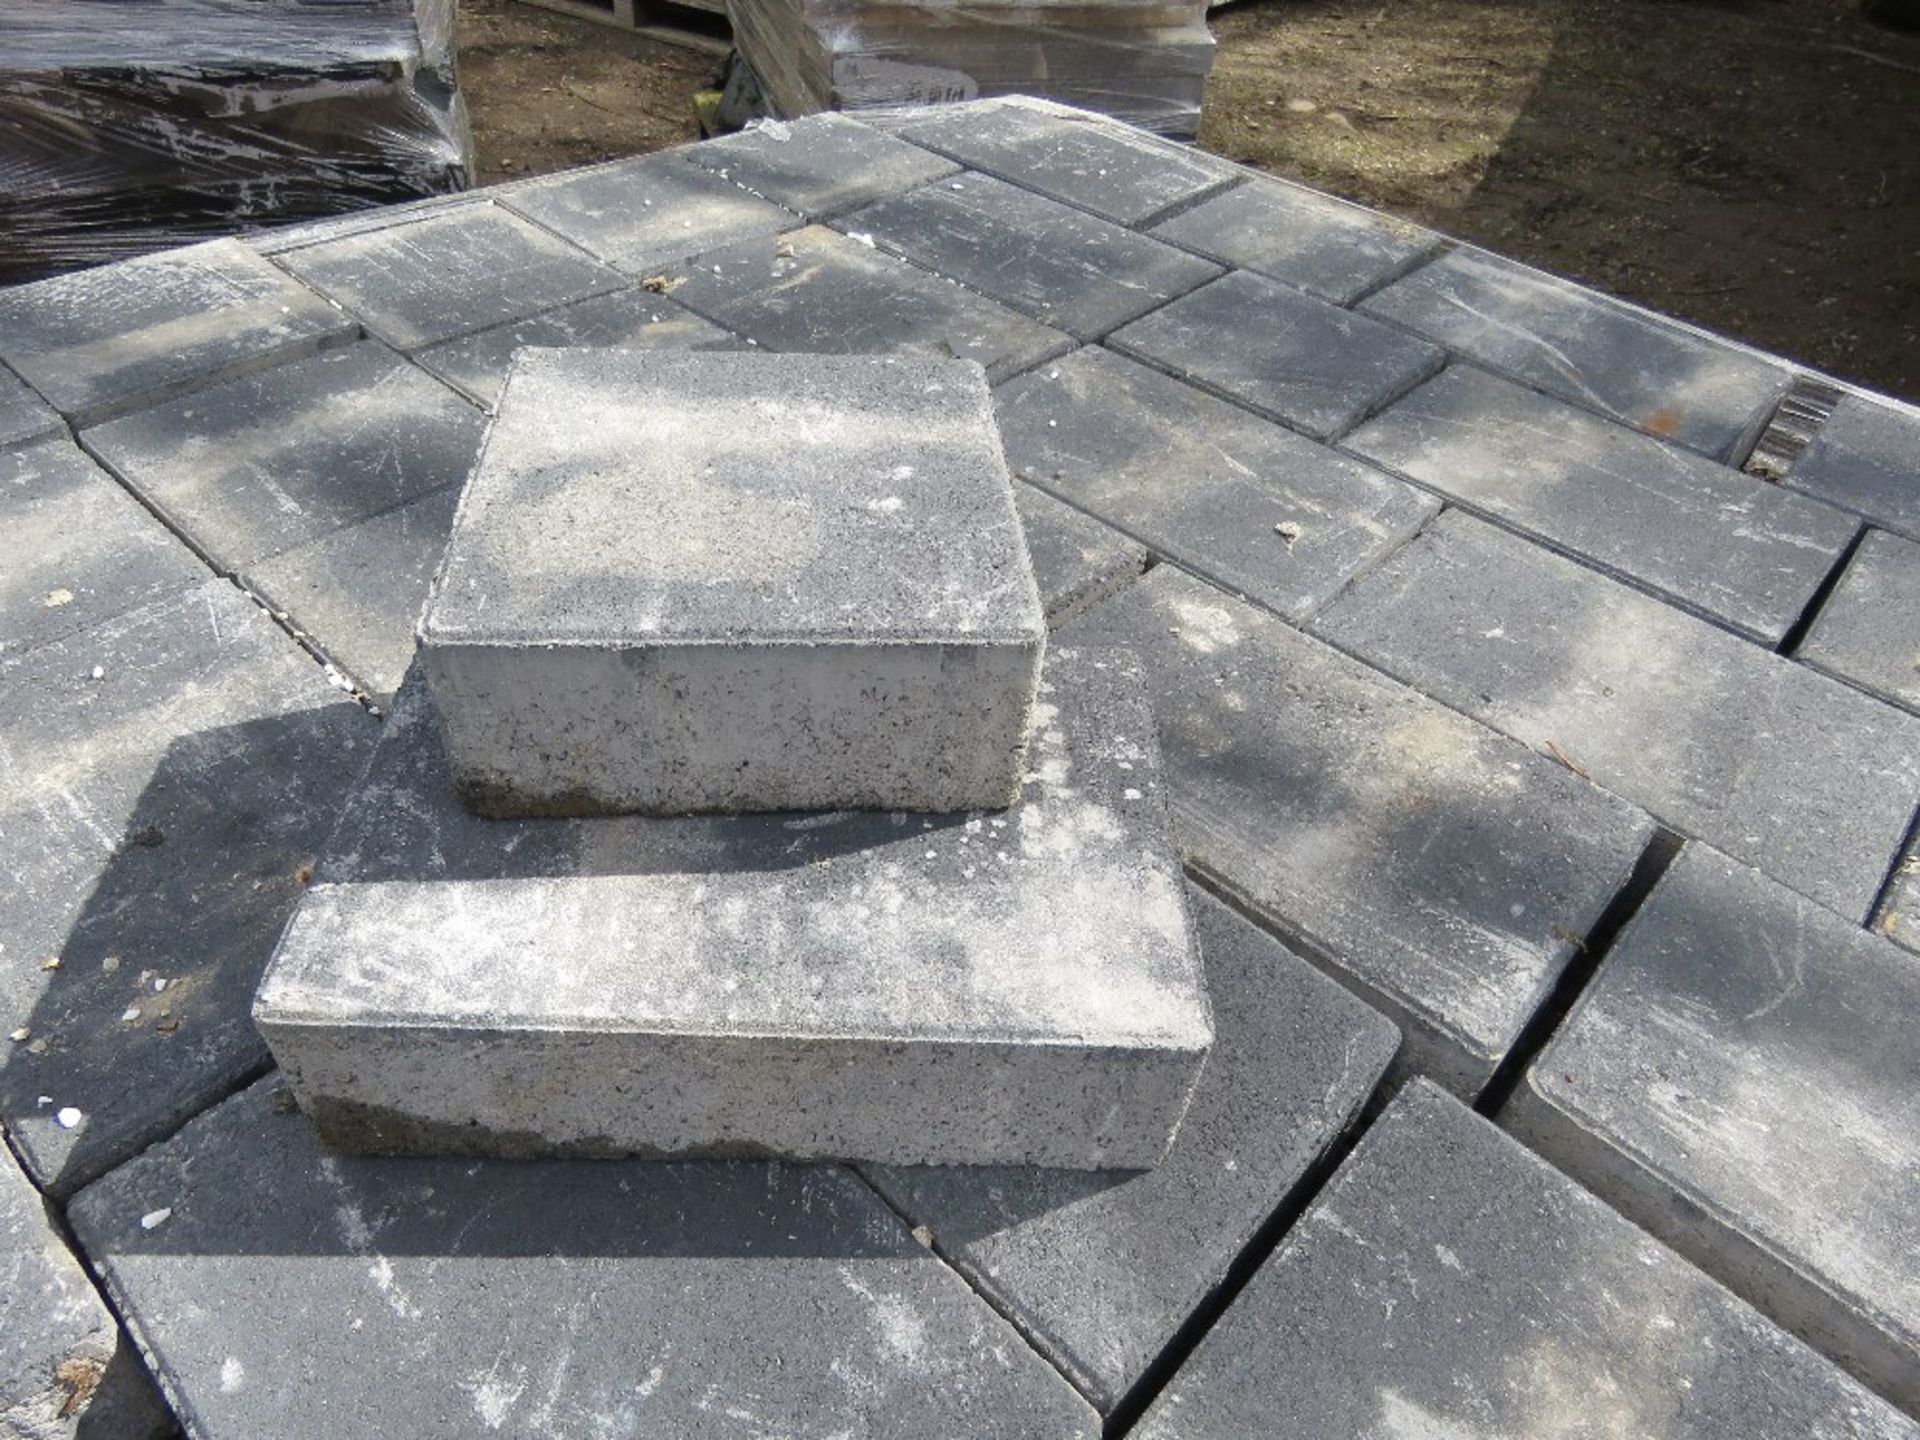 2 X PALLETS OF BLOCK PAVERS, BLACK COLOURED. - Image 5 of 7